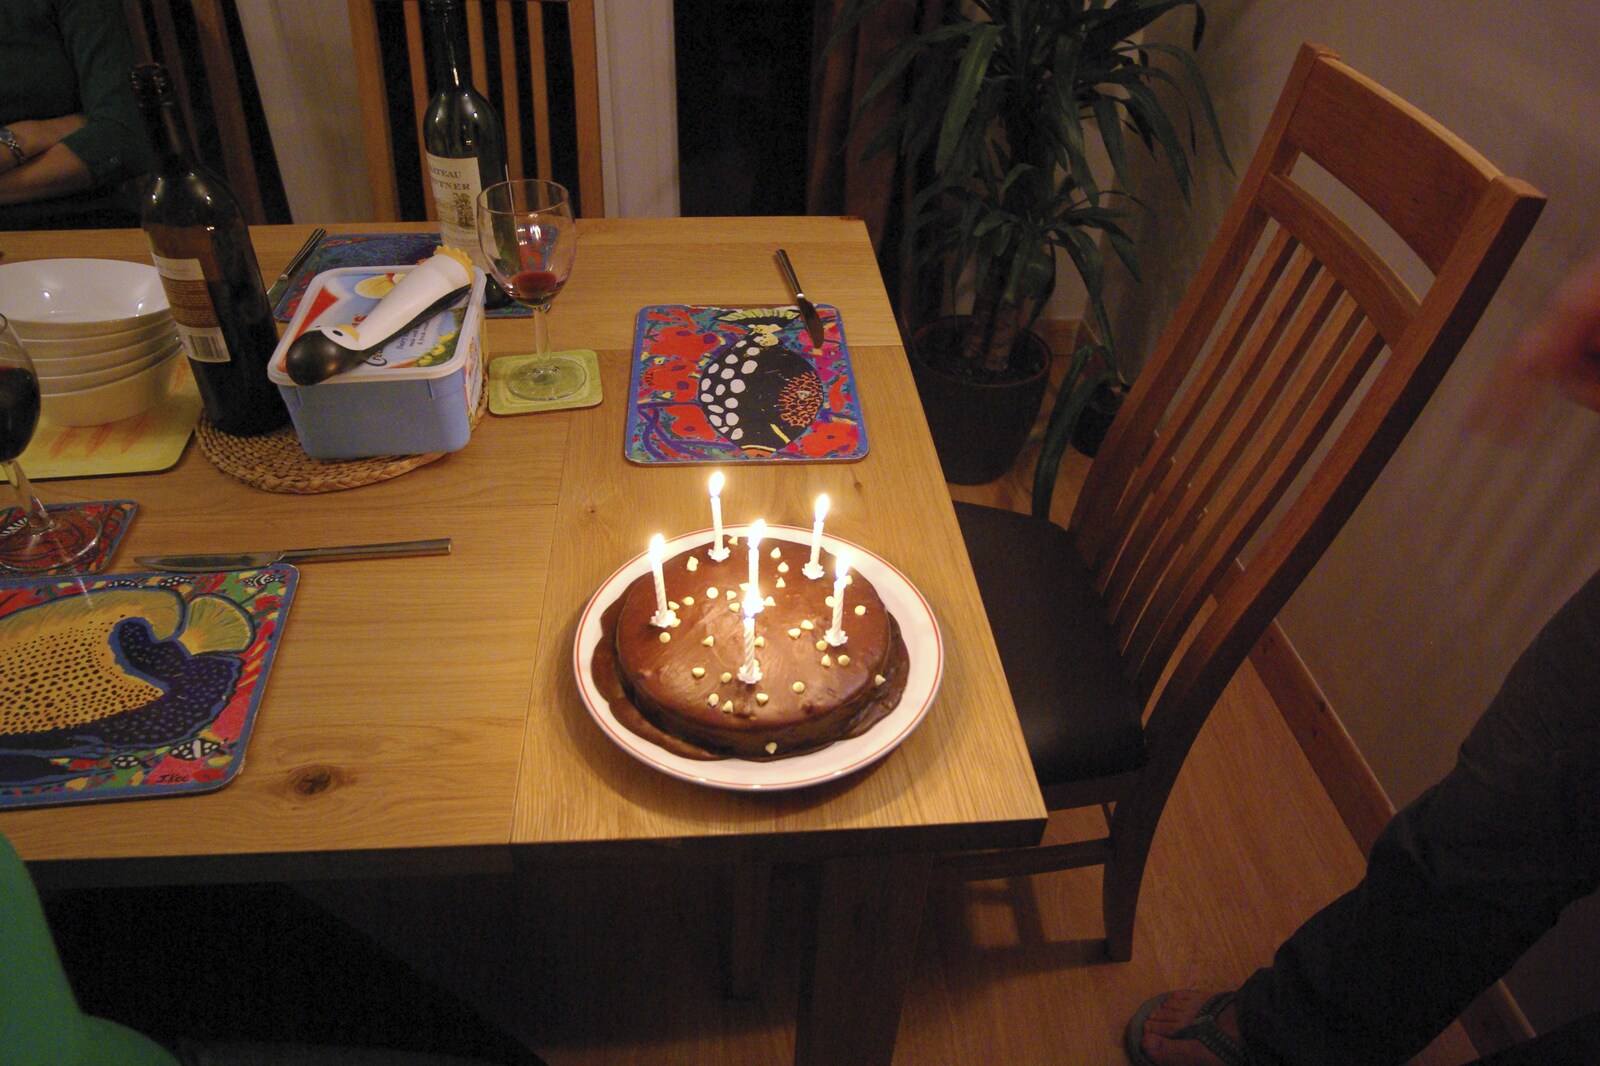 Cambridge Fireworks, and Dinner at Caroline and John's, Cambridge - 5th November 2007: There's a cake for Caroline's birthday